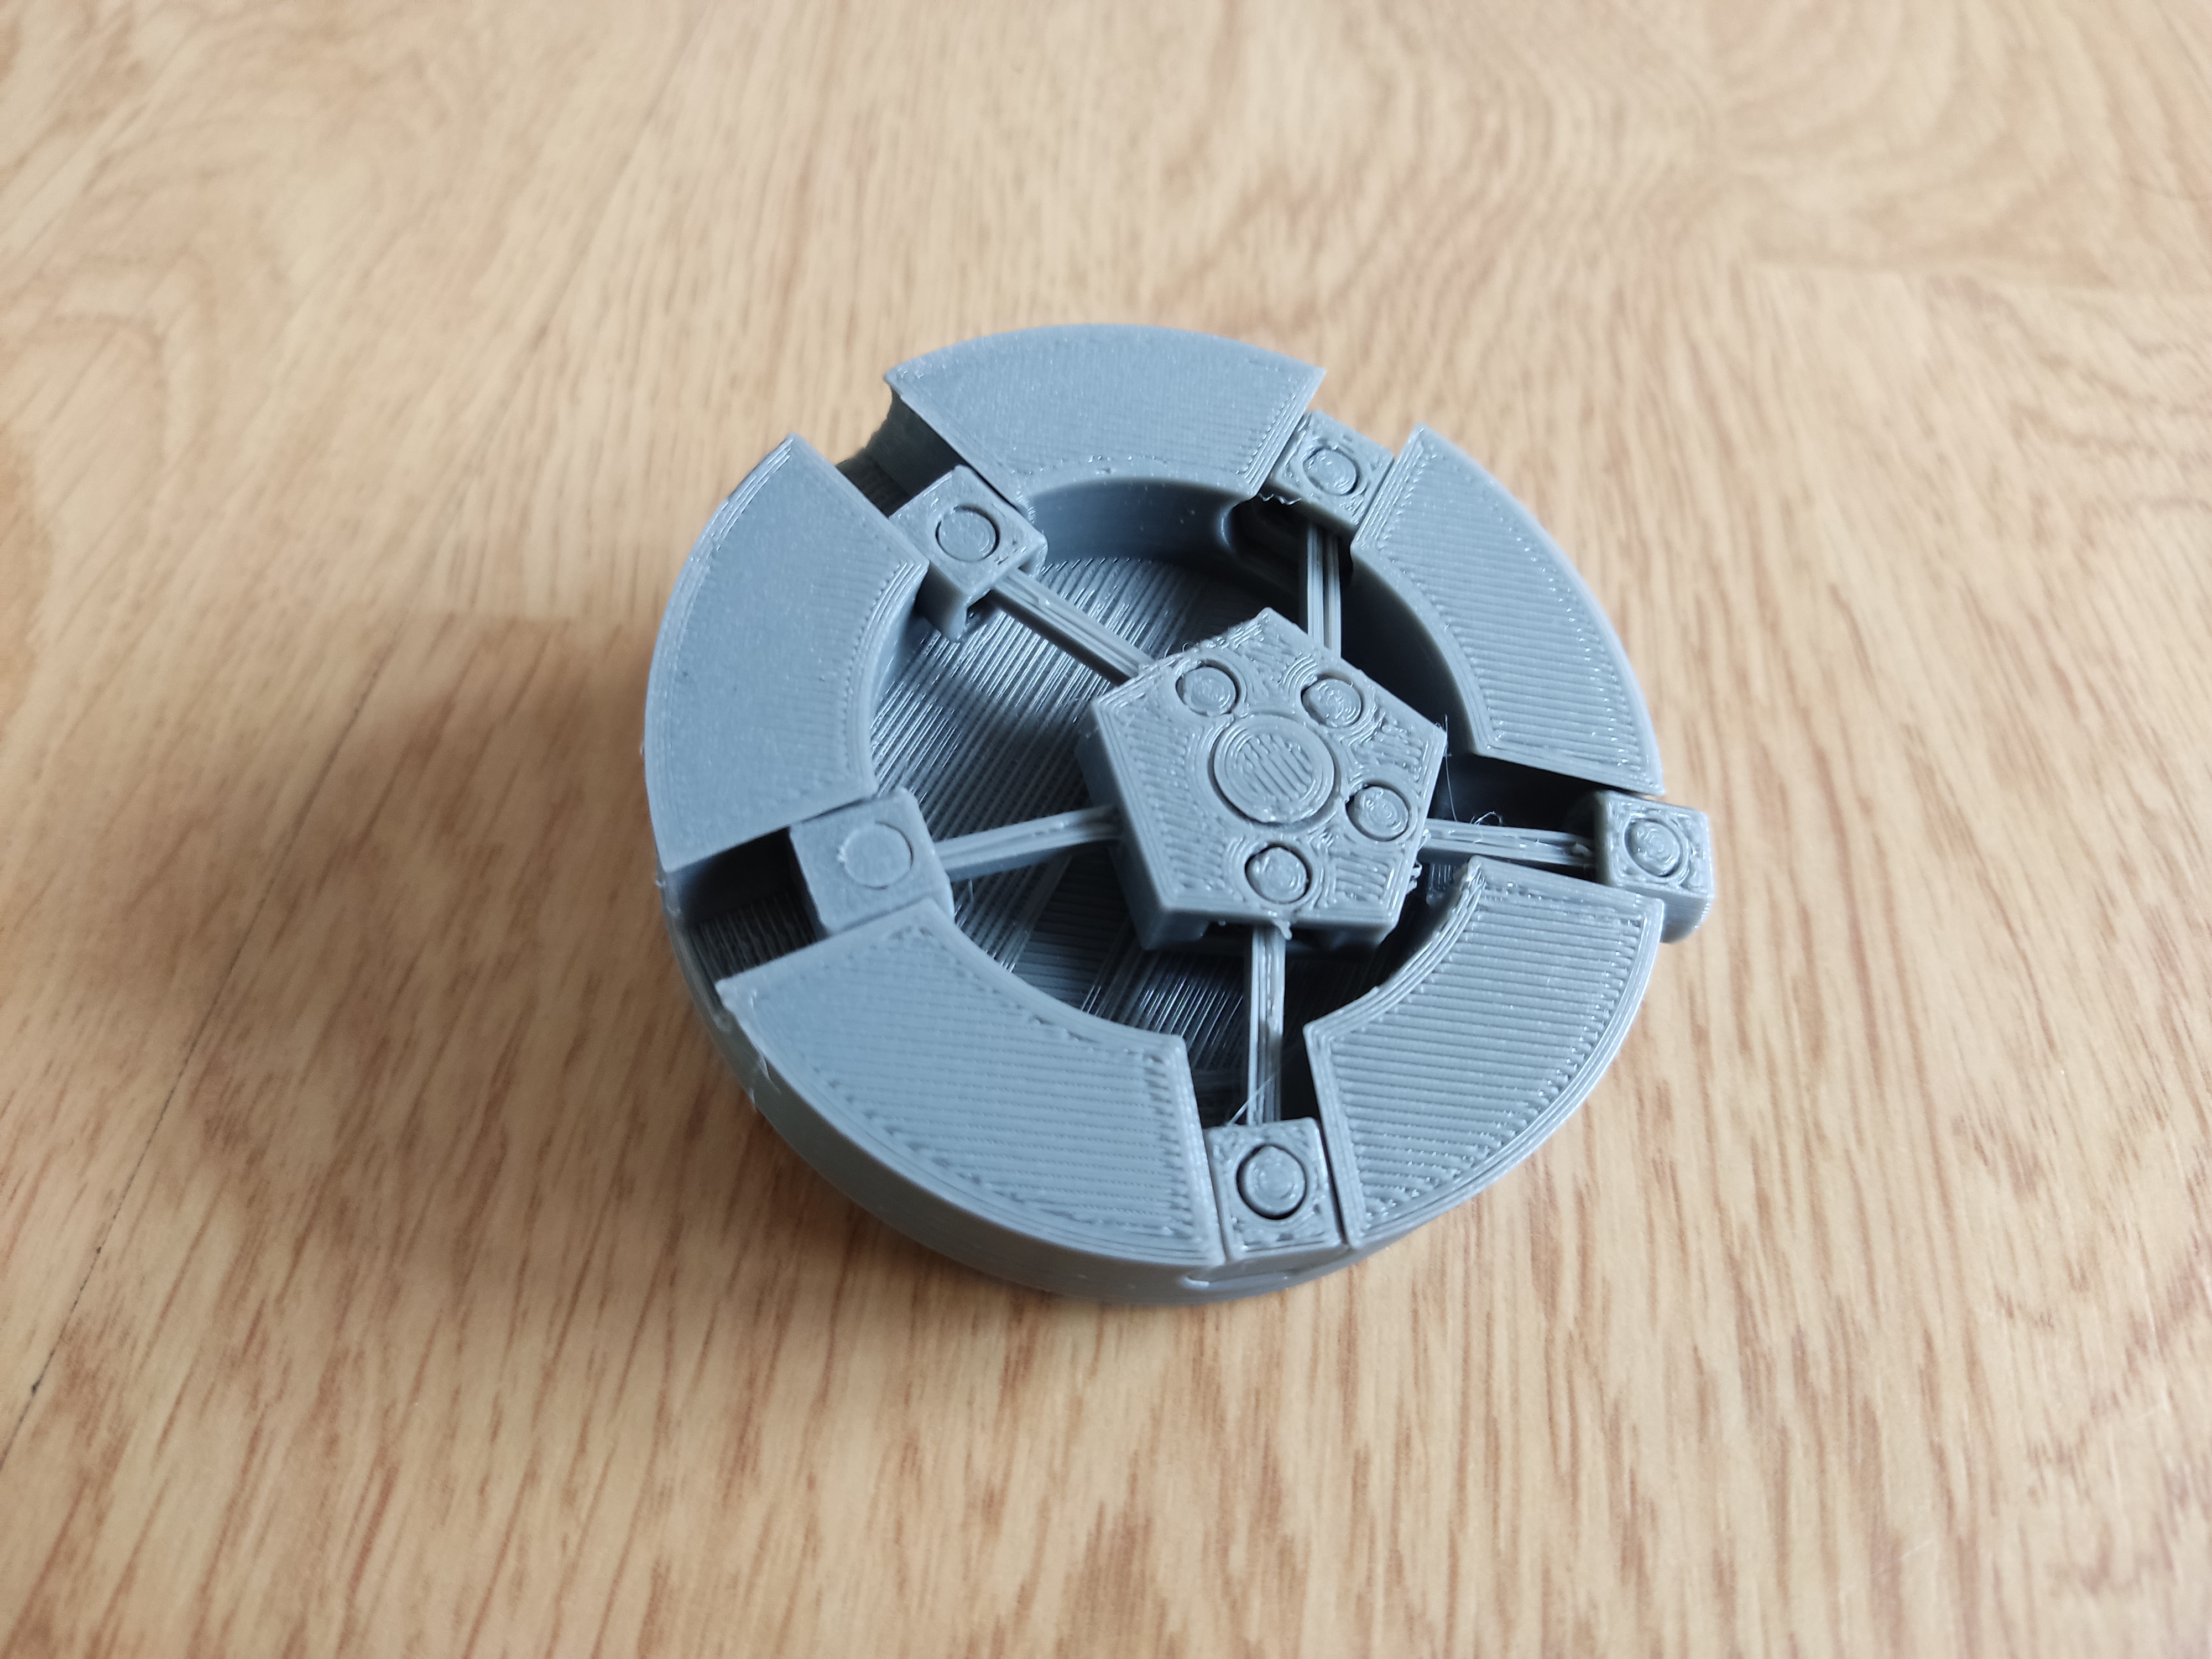 Radial/rotary engine toy (print in place)